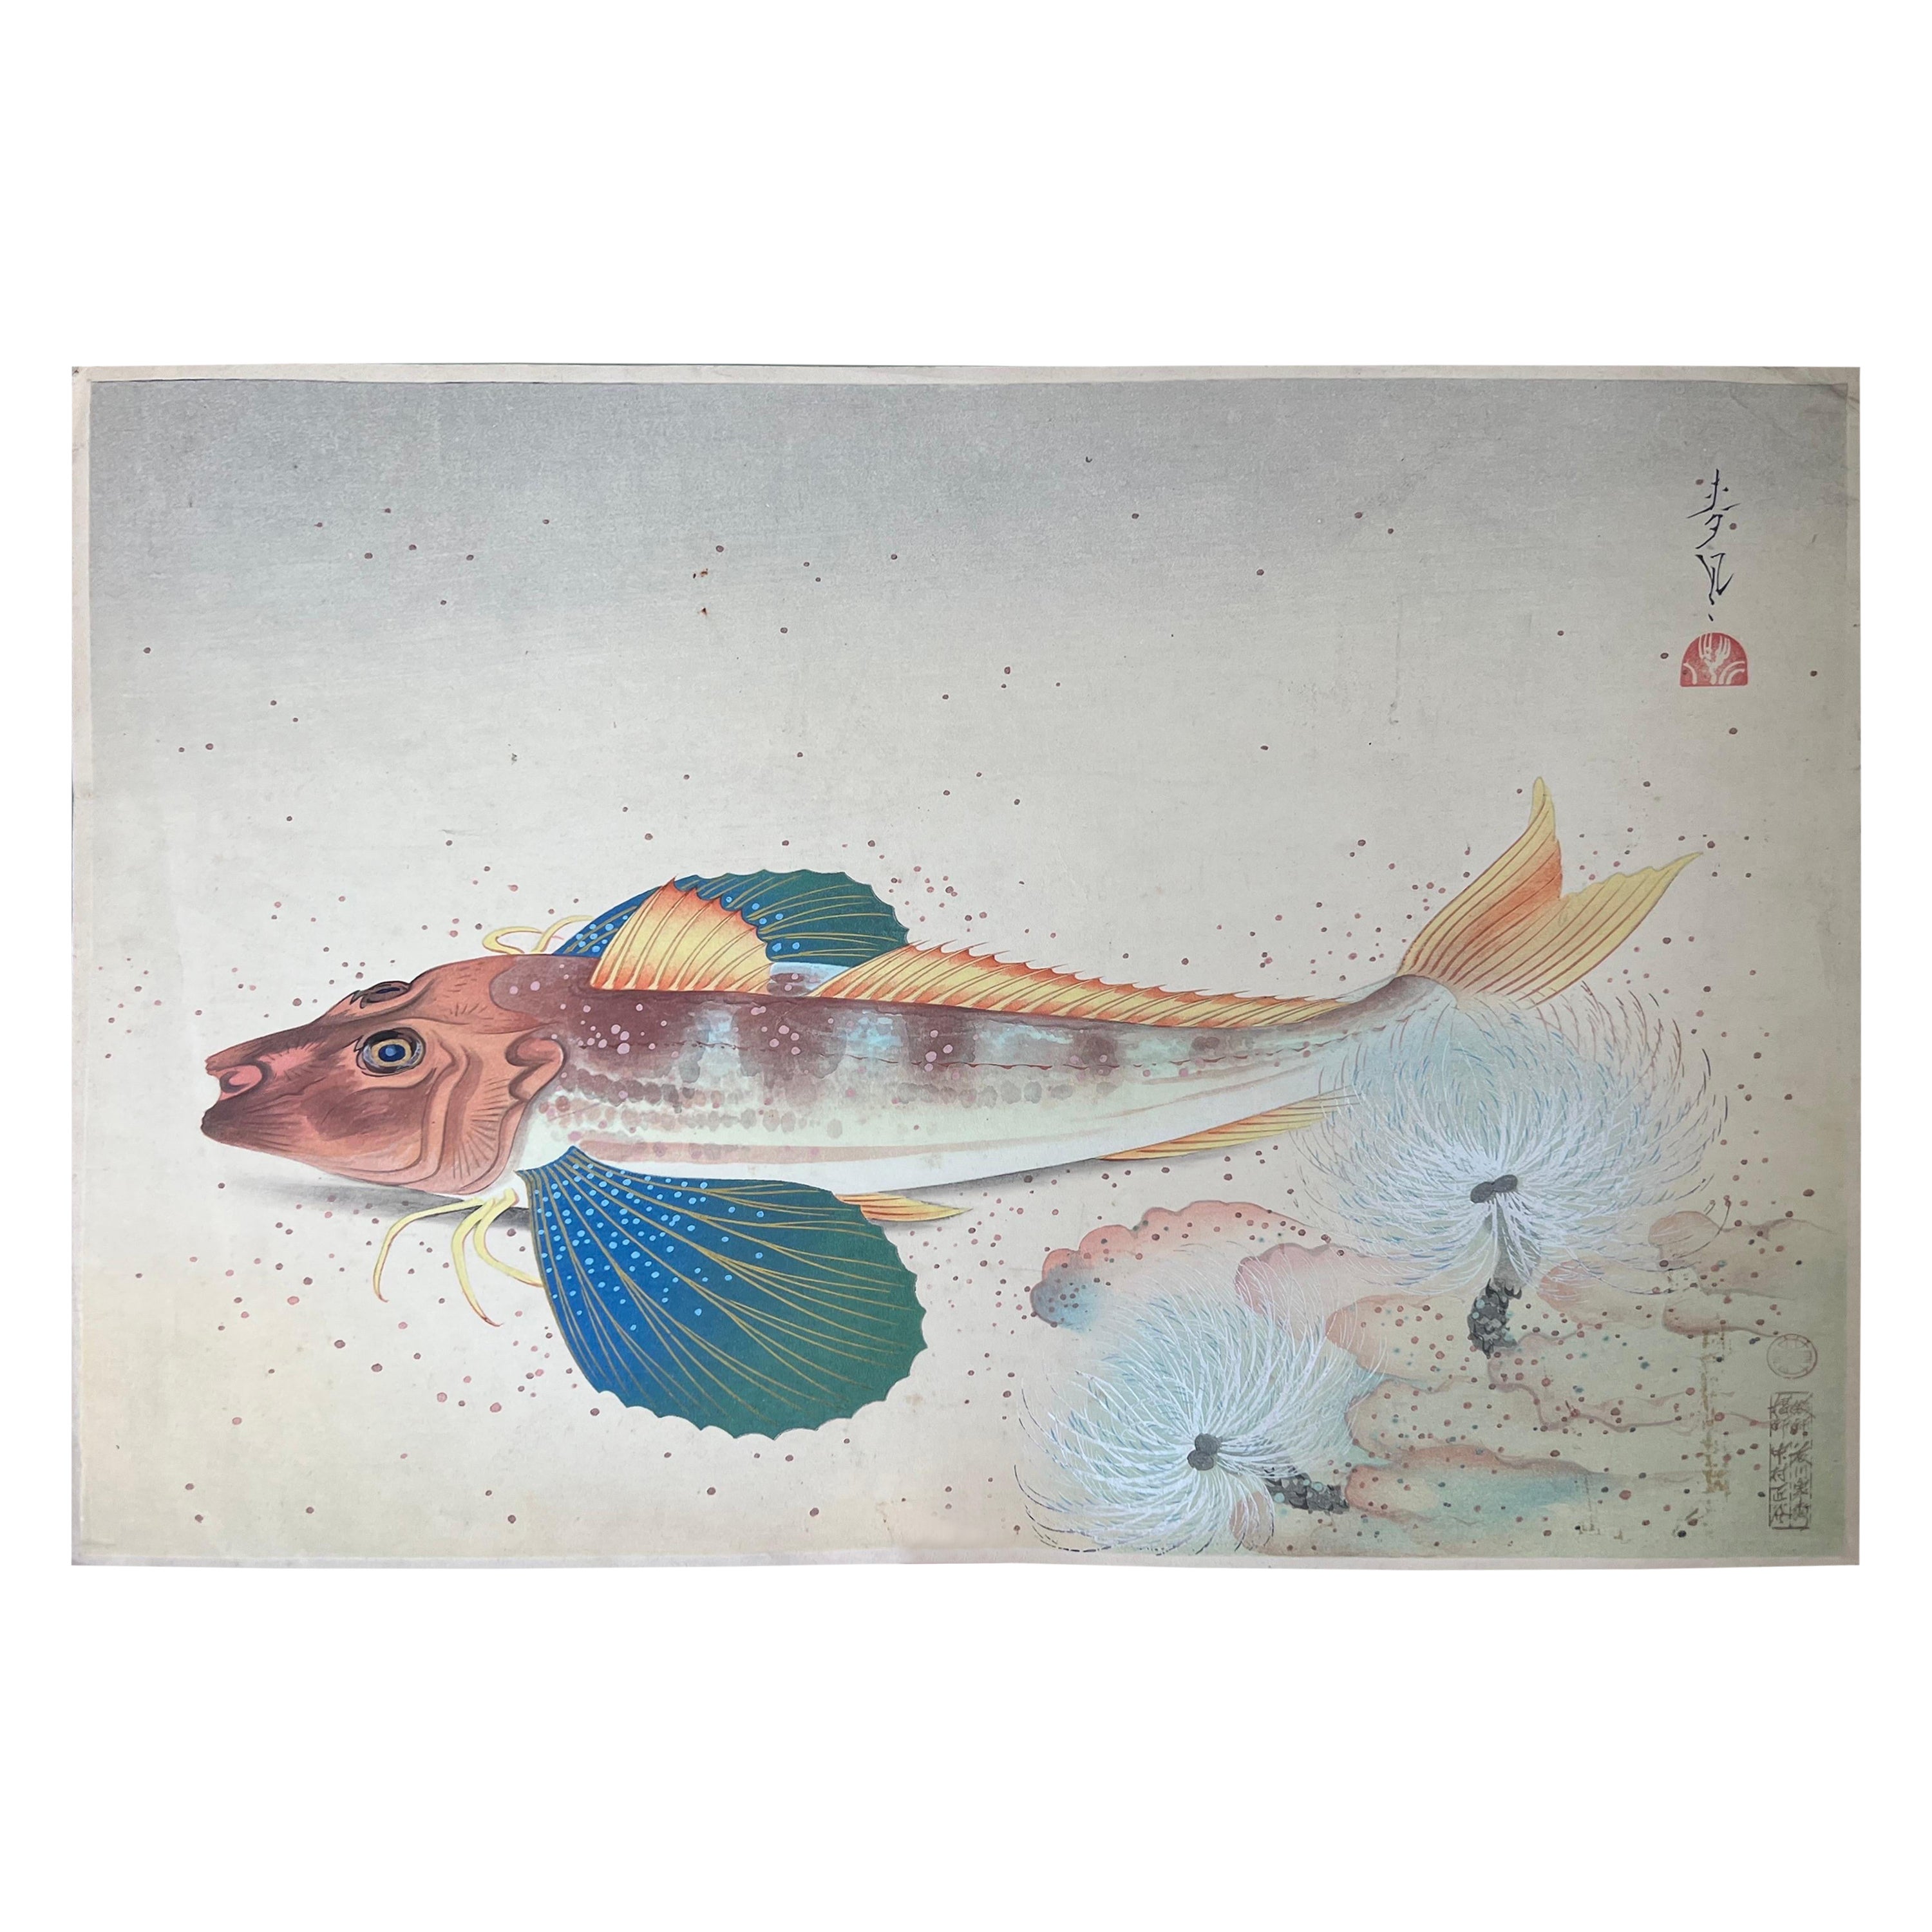 Ono Bakufu, Great Japanese Fish Picture Collection / The Hobo (Gurnard)